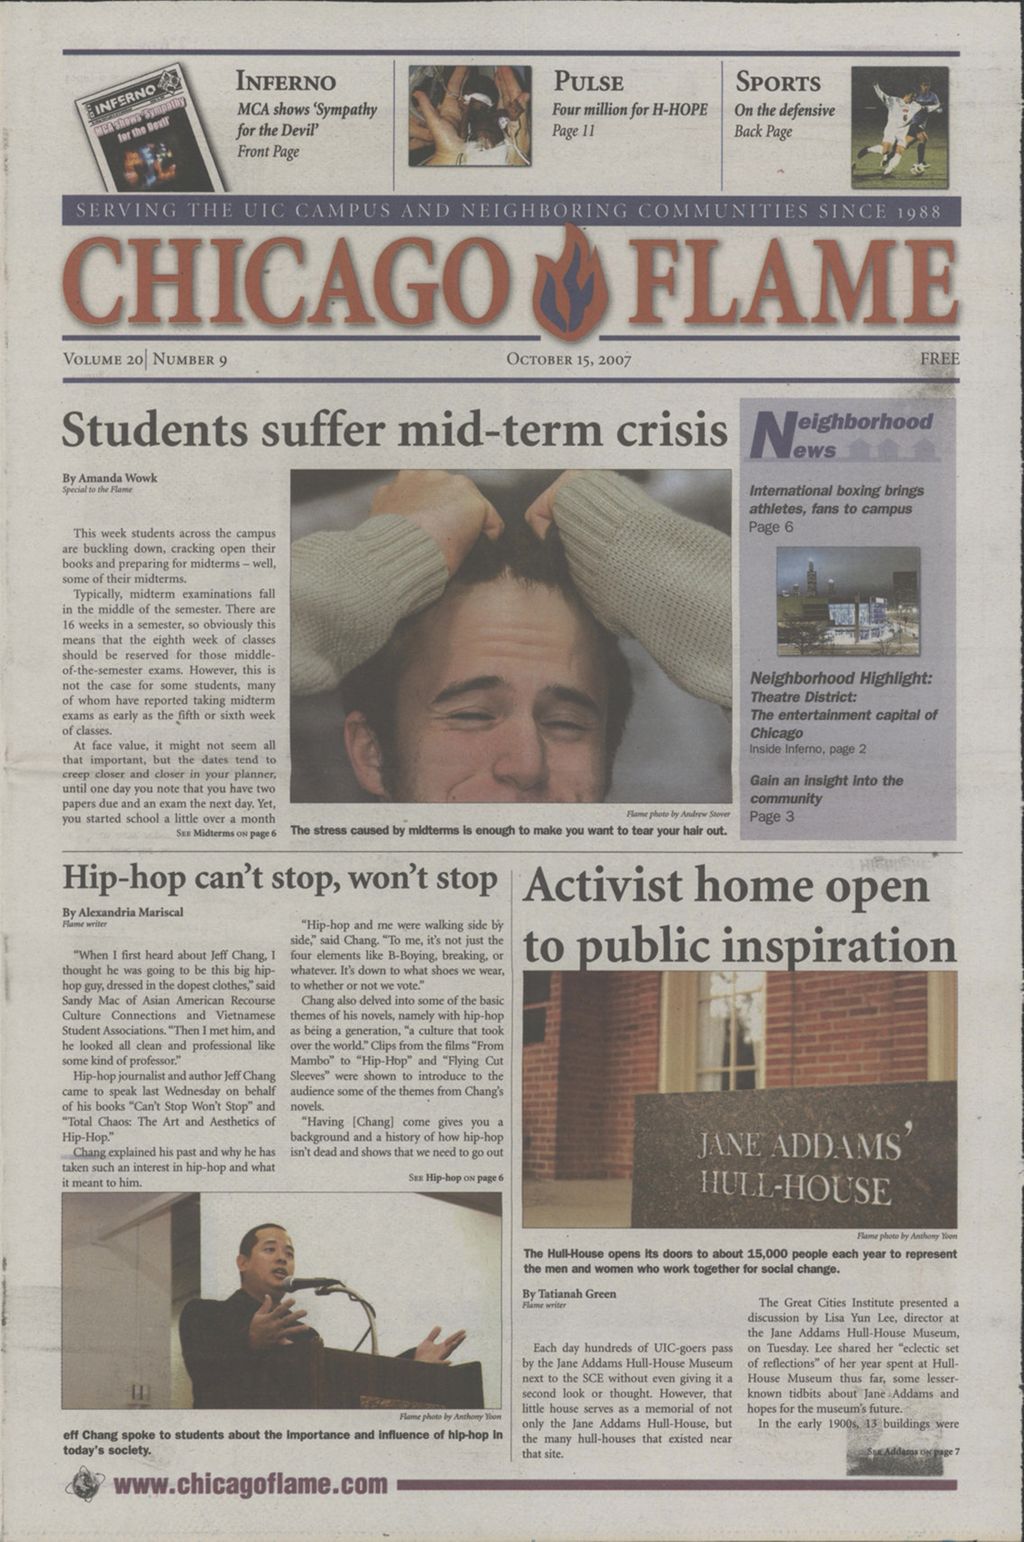 Chicago Flame (October 15, 2007)